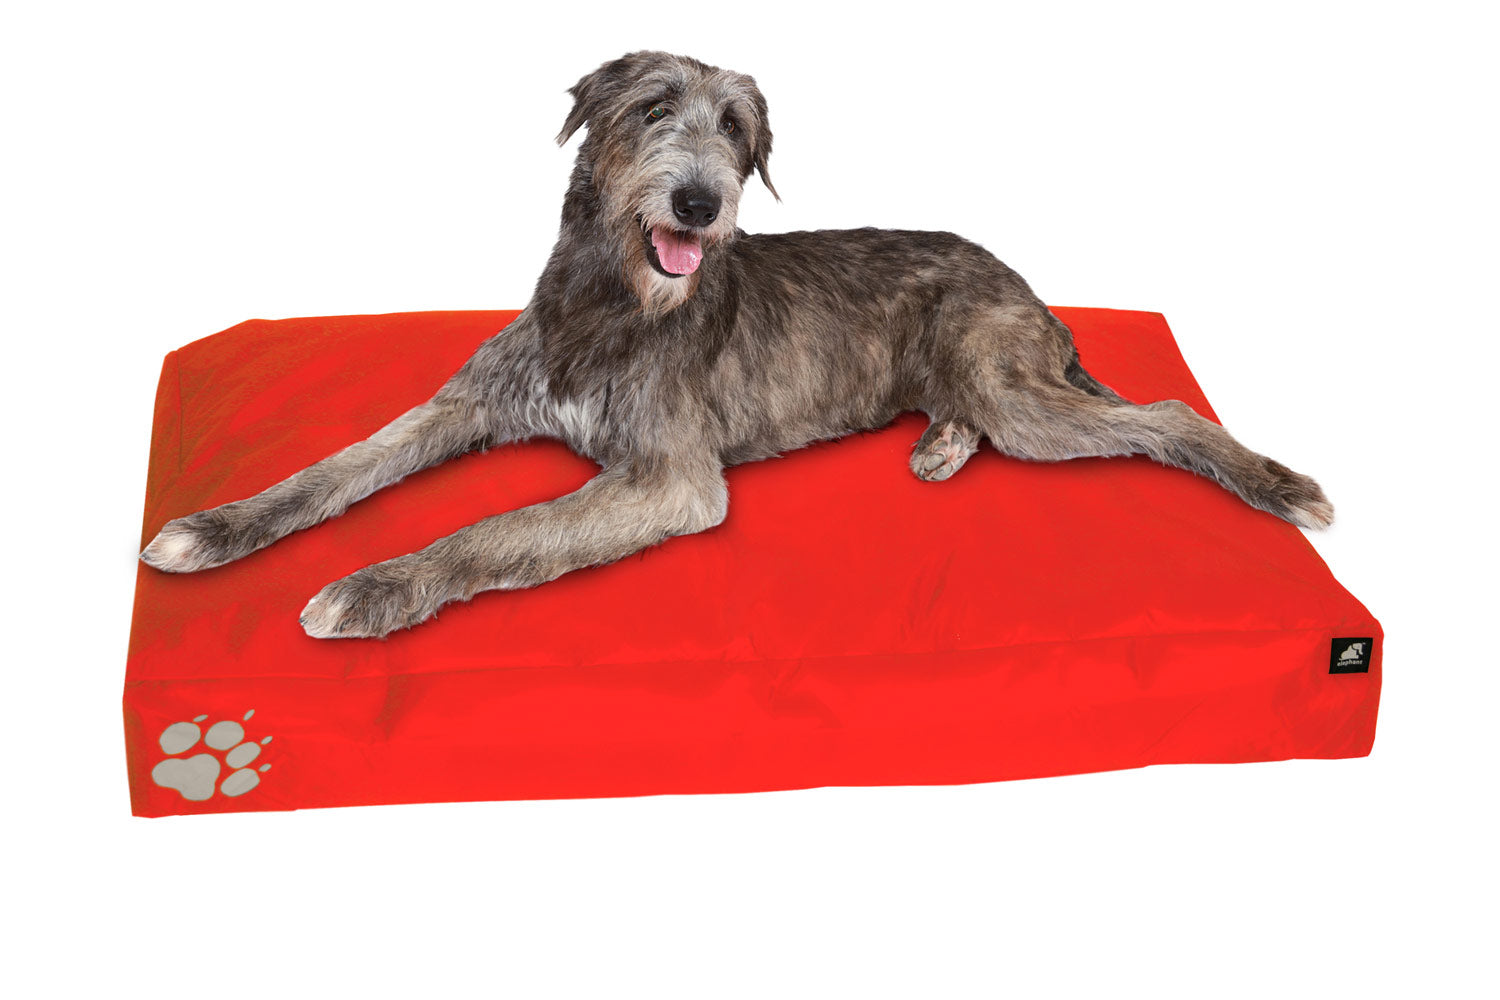 Elephant Dog Beds Elephant Dog Beds Elephant Living Large Vibrant Red 